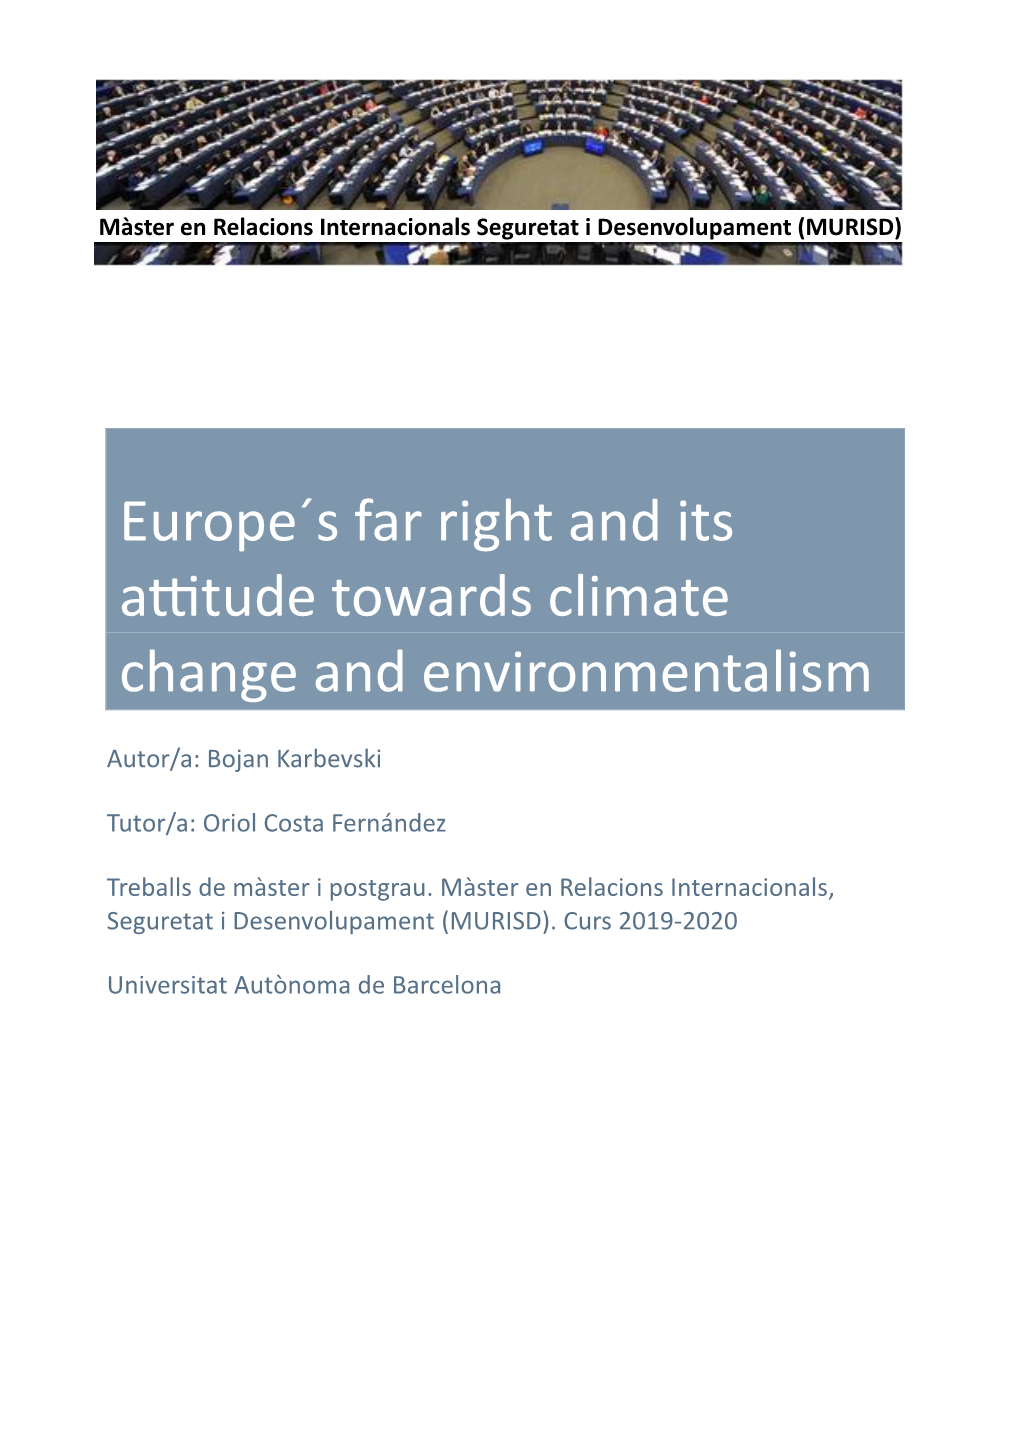 Europe´S Far Right and Its Attitude Towards Climate Change and Environmentalism